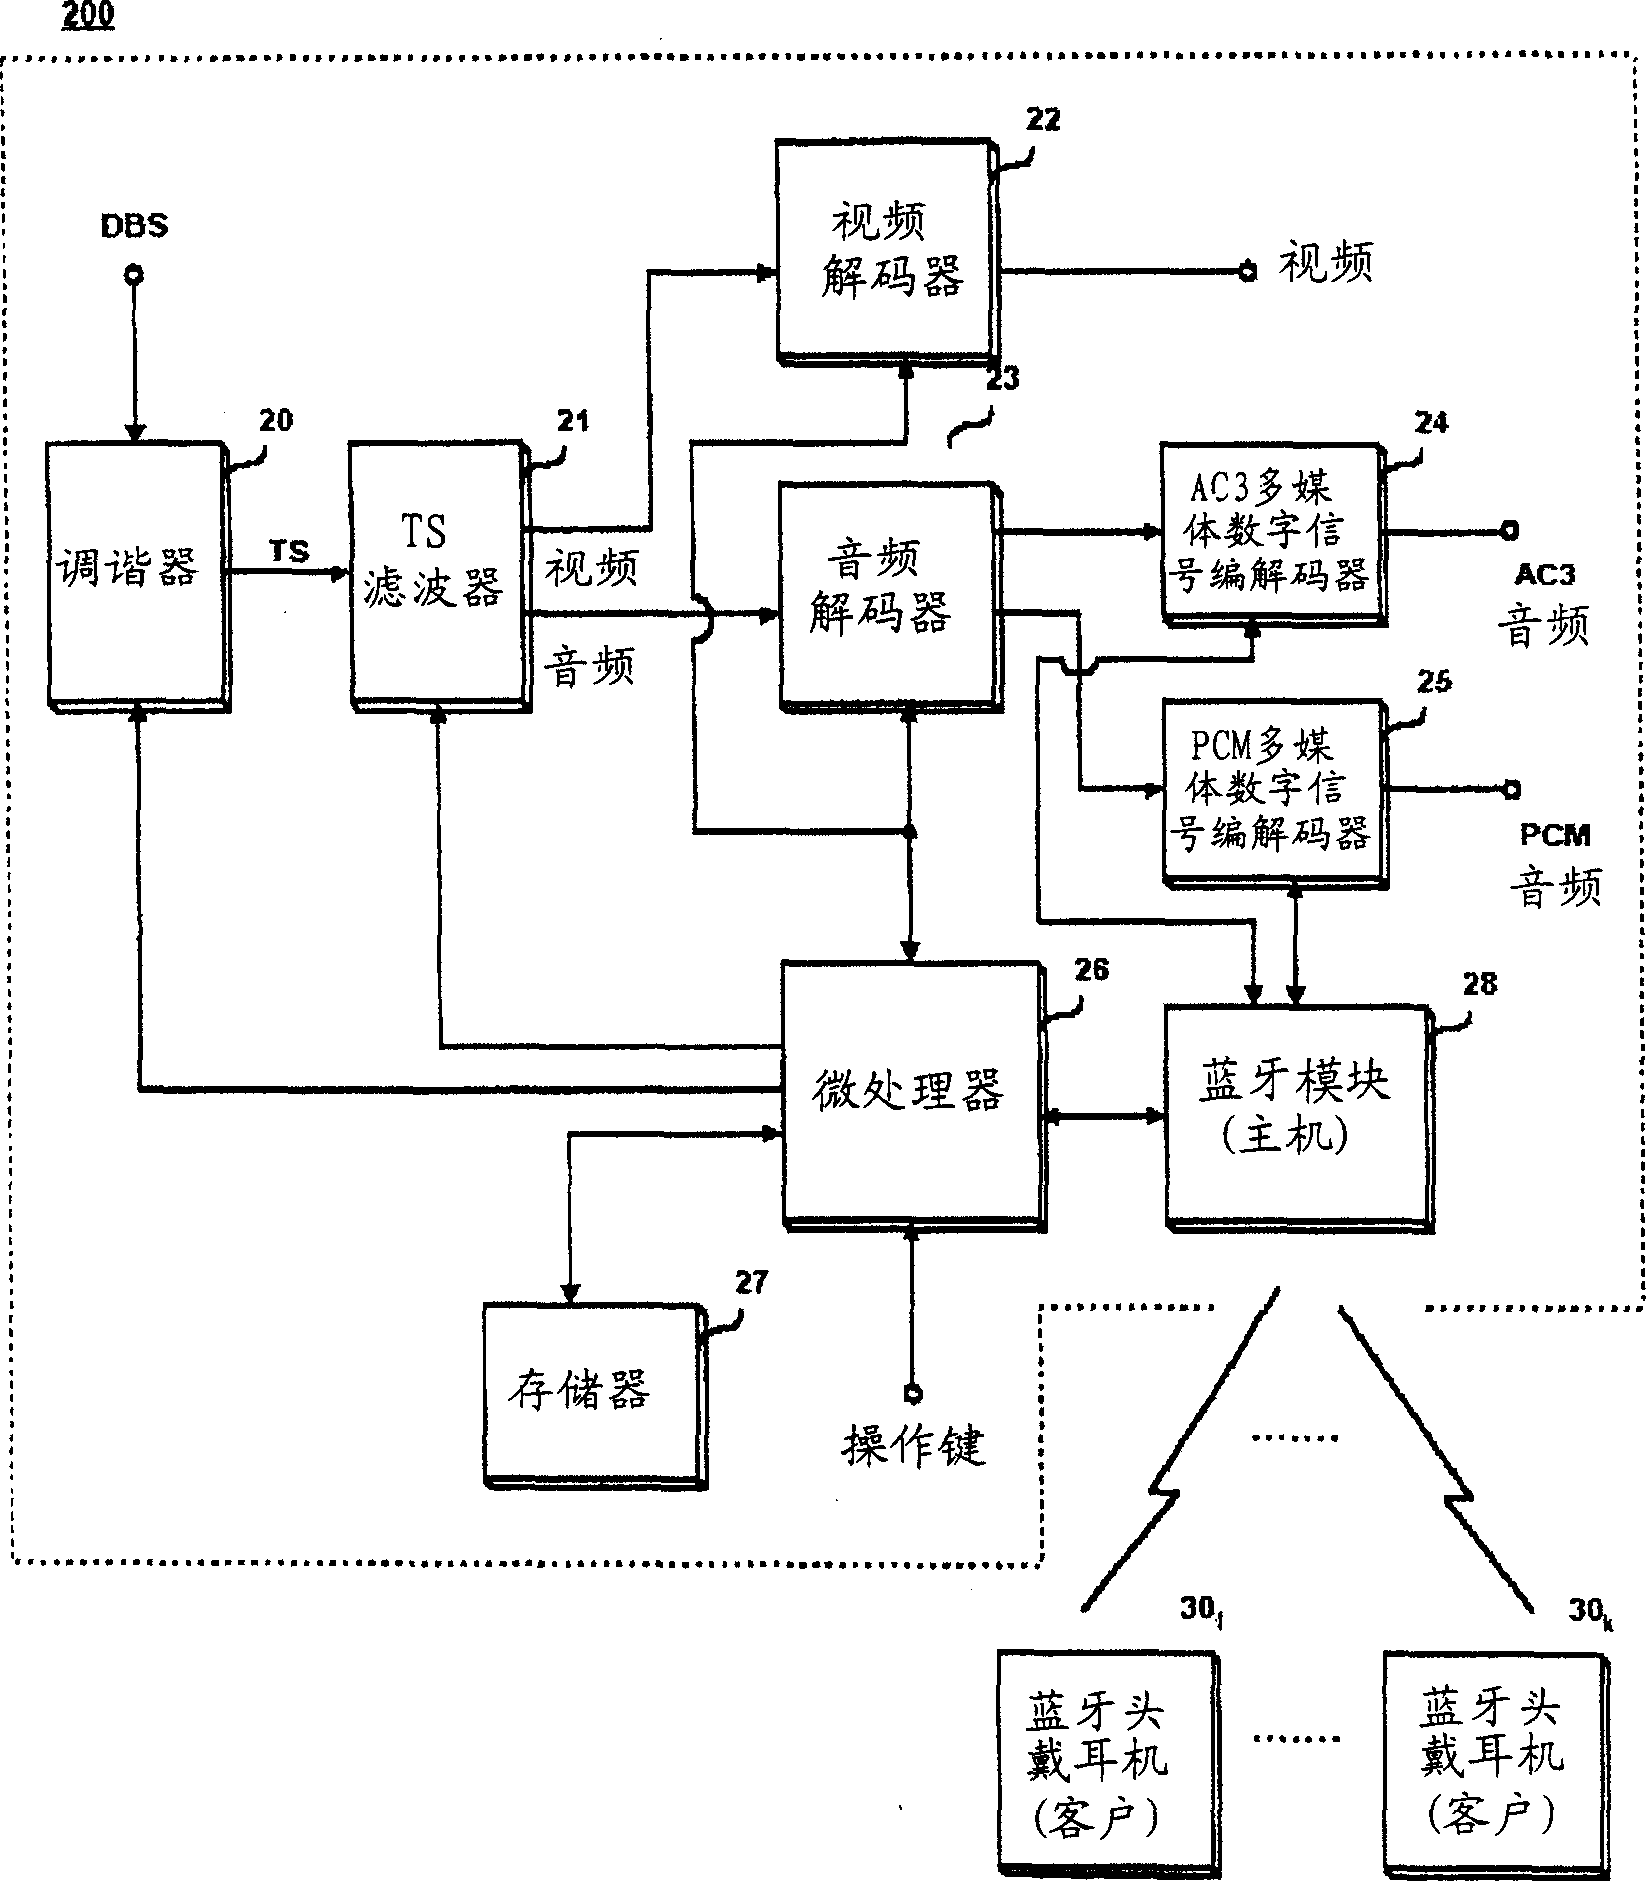 Blue tooth wireless audio output device for digital broadcasting receiver and method thereof